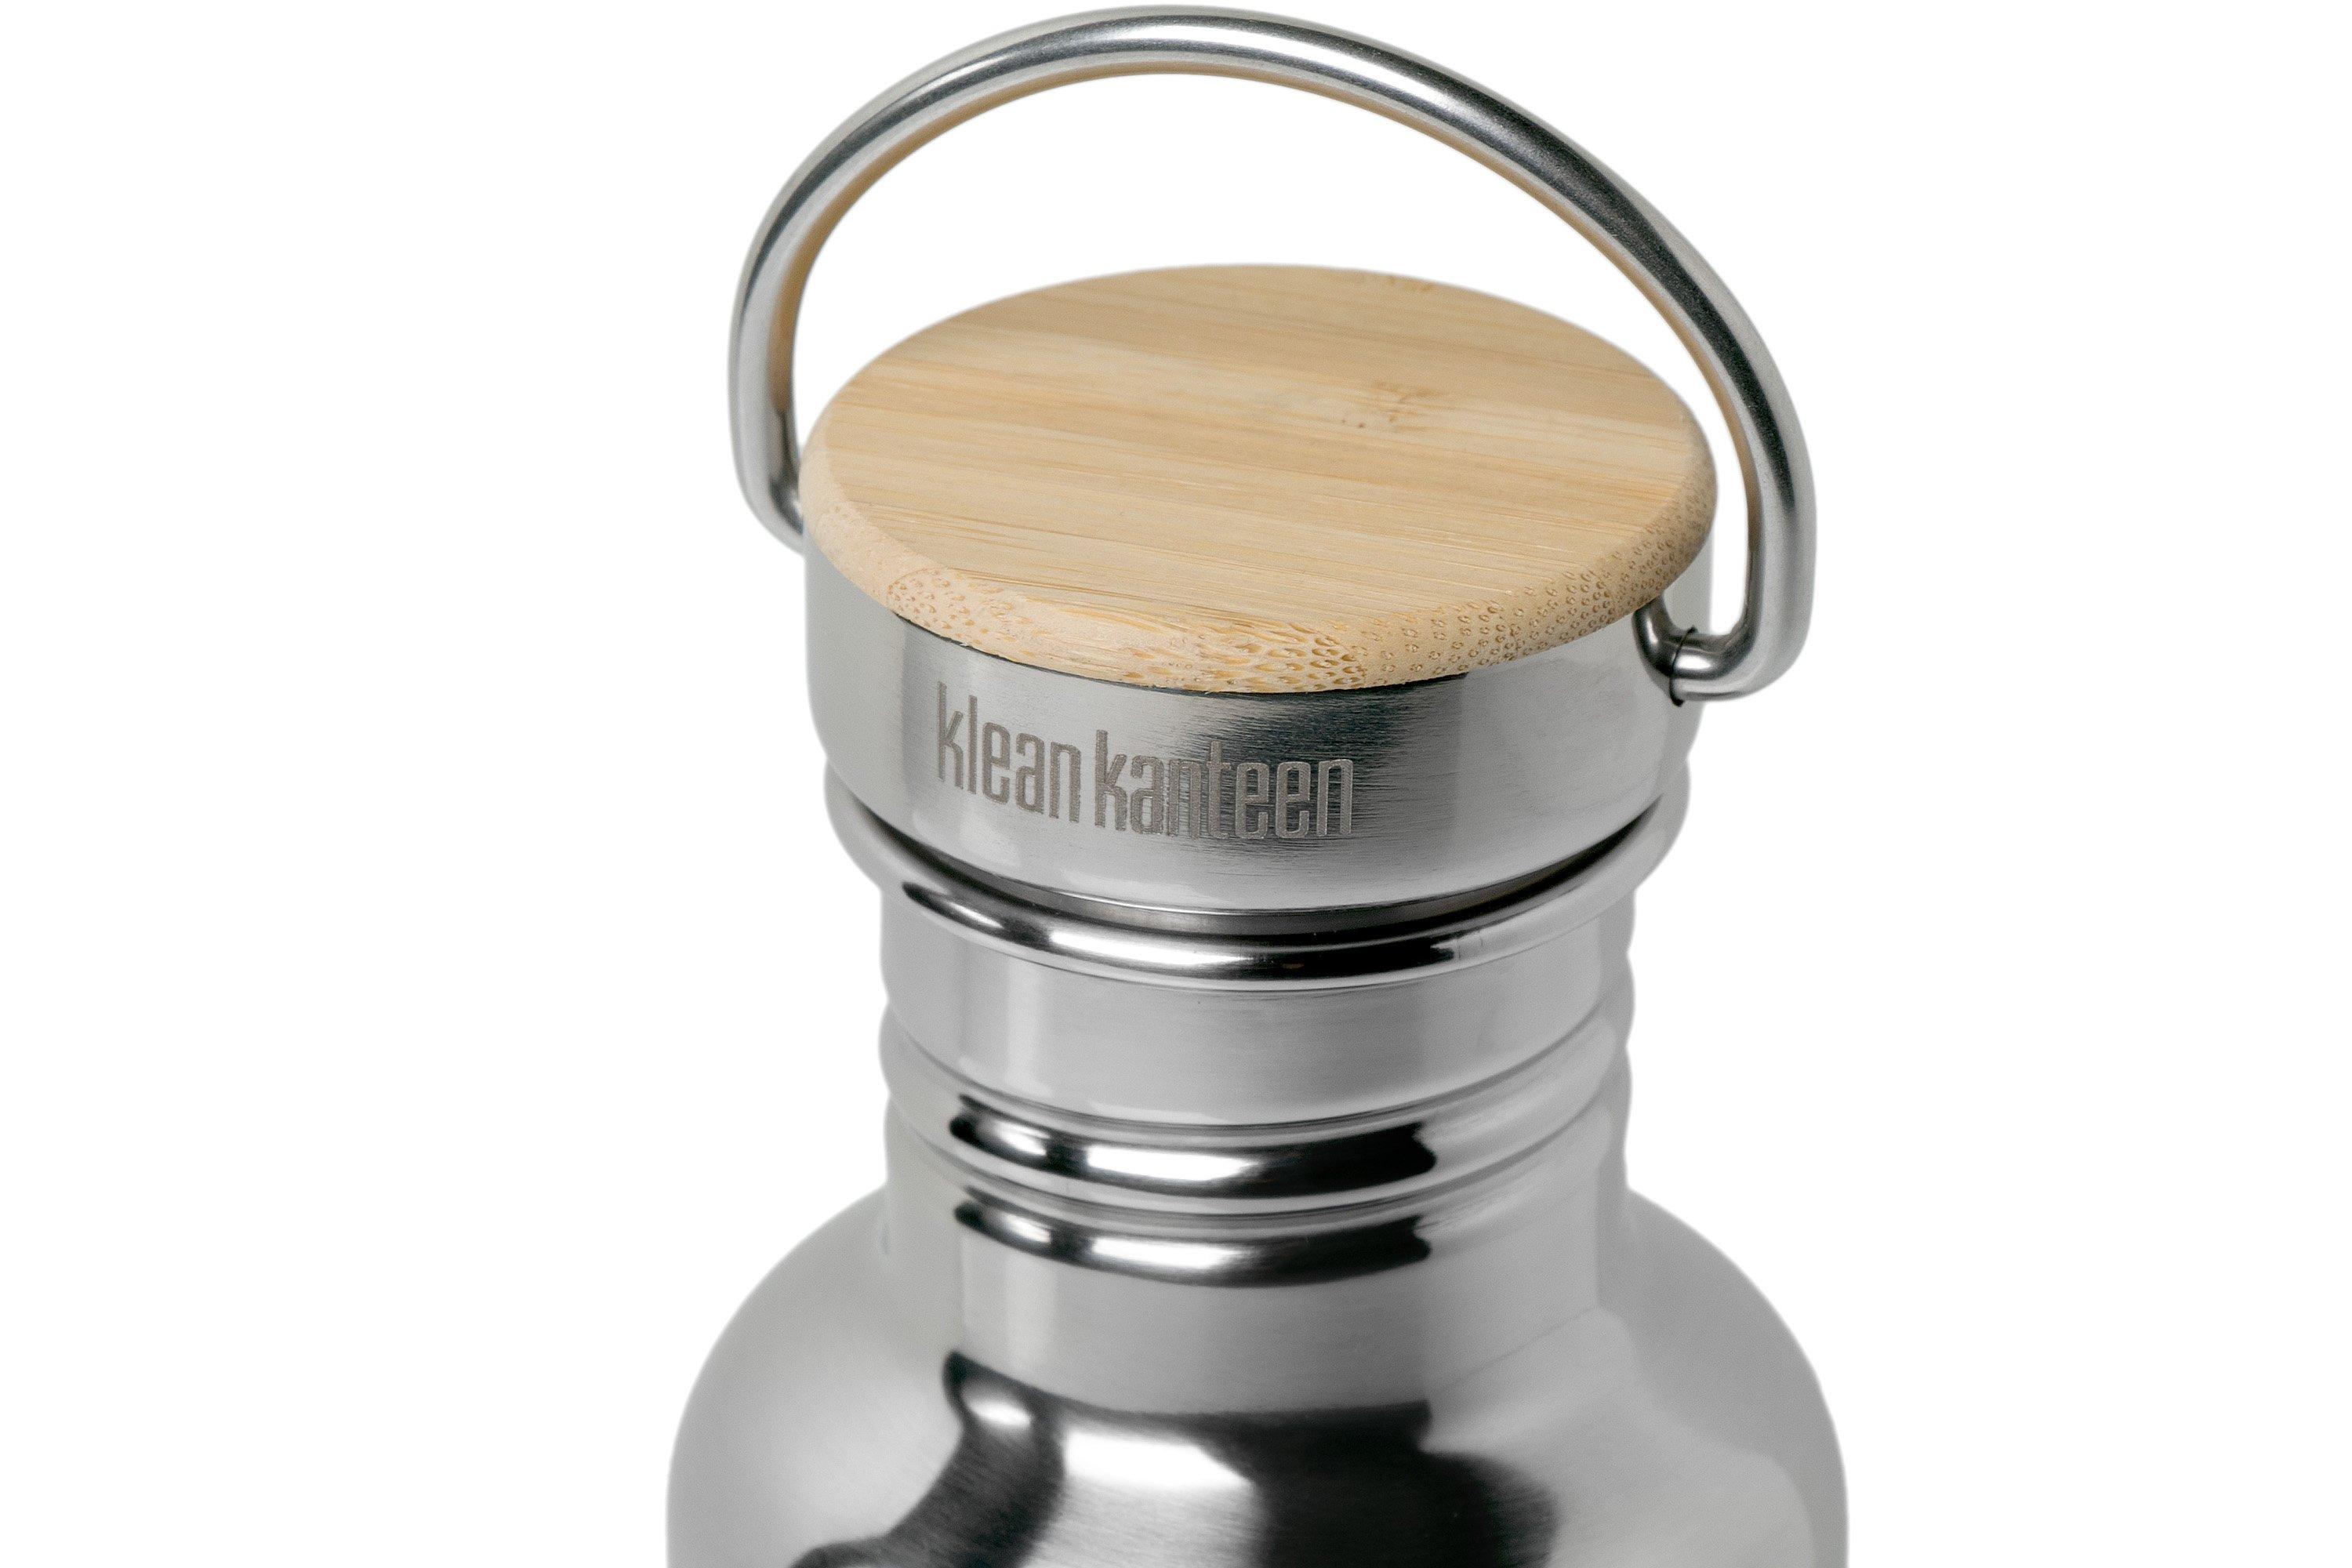 Klean Kanteen Reflect 800 ml water bottle with bamboo cap, mirrored  stainless